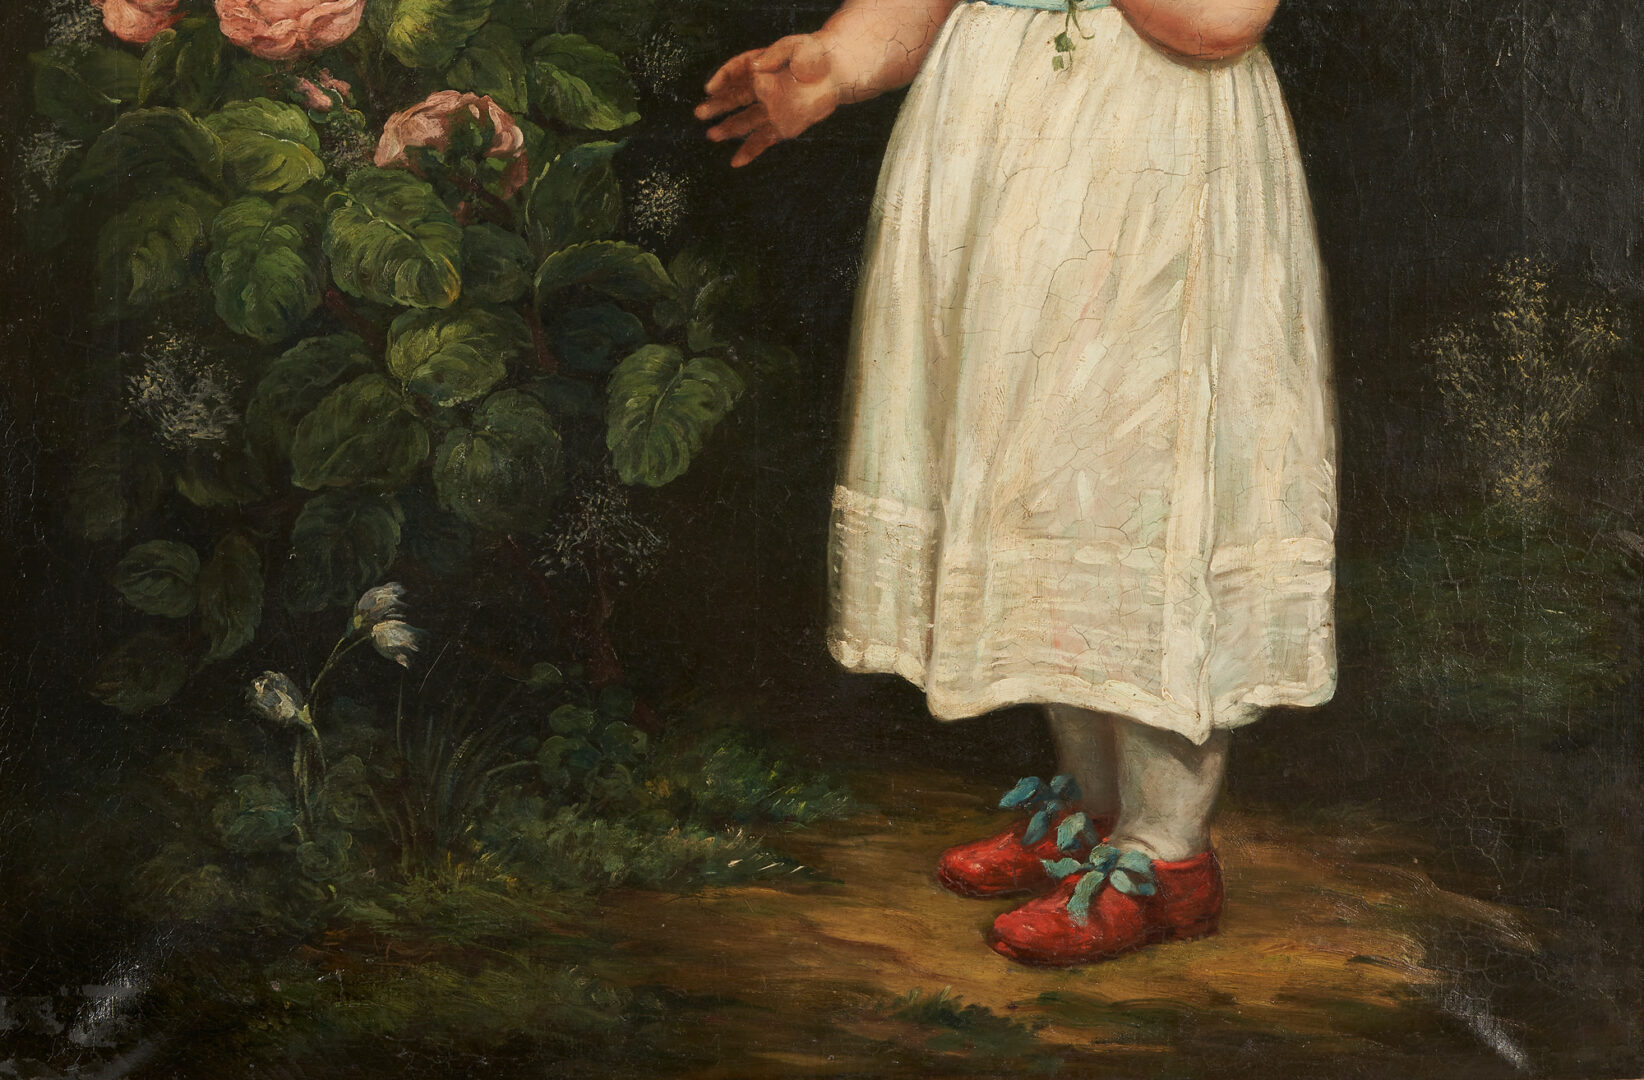 Lot 851: 19th C. O/C Portrait Painting of a Child with Rose Bush